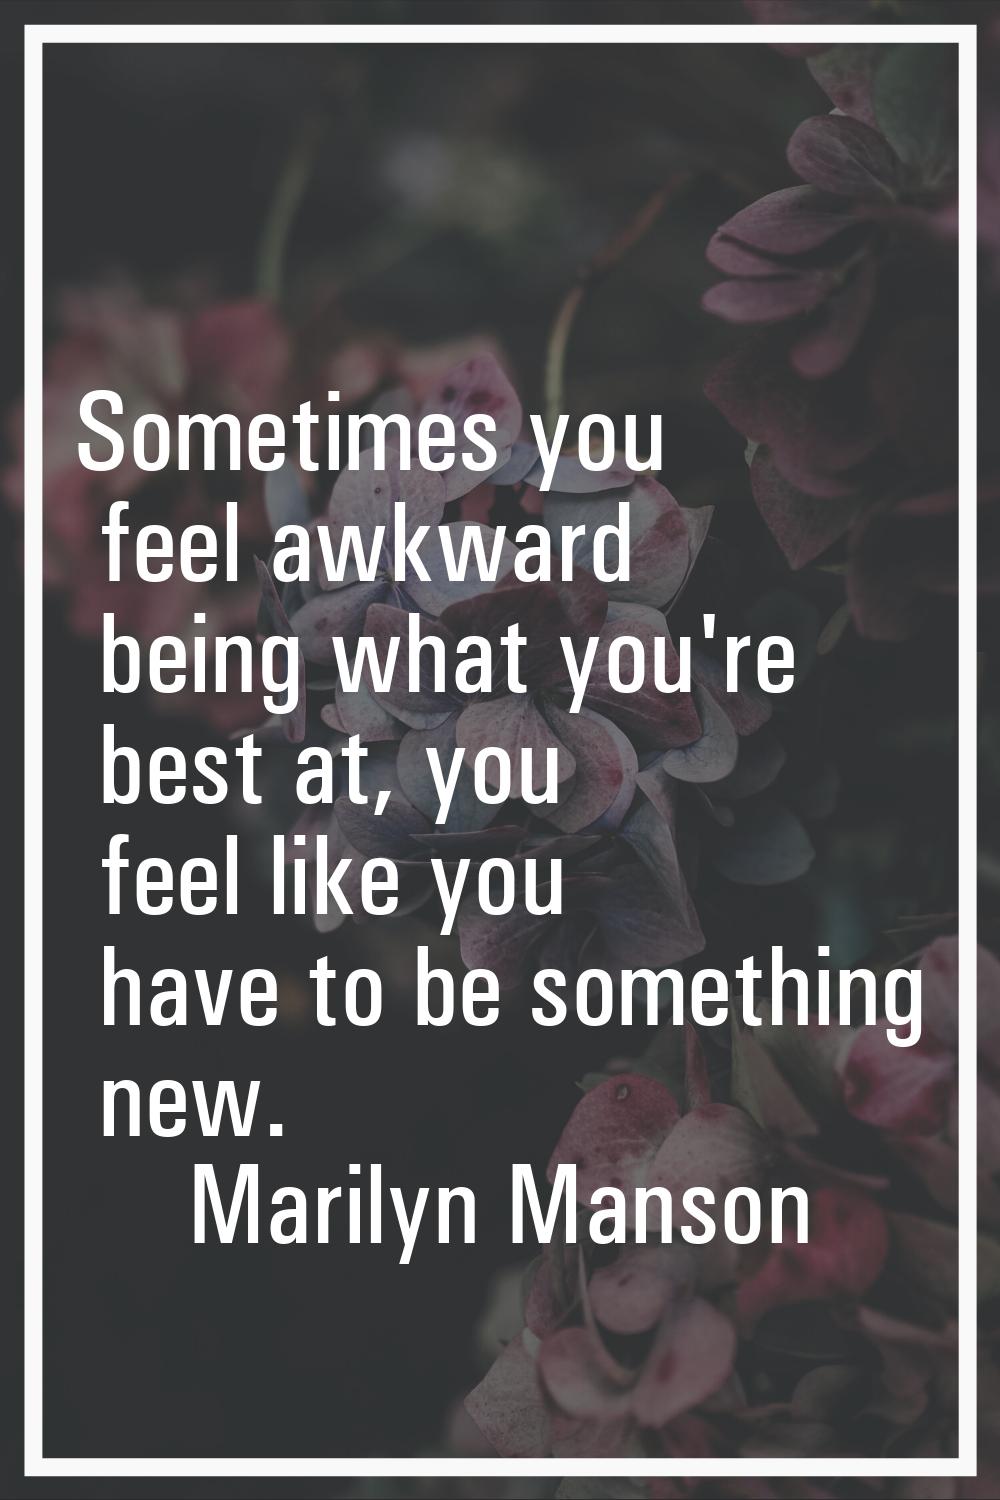 Sometimes you feel awkward being what you're best at, you feel like you have to be something new.